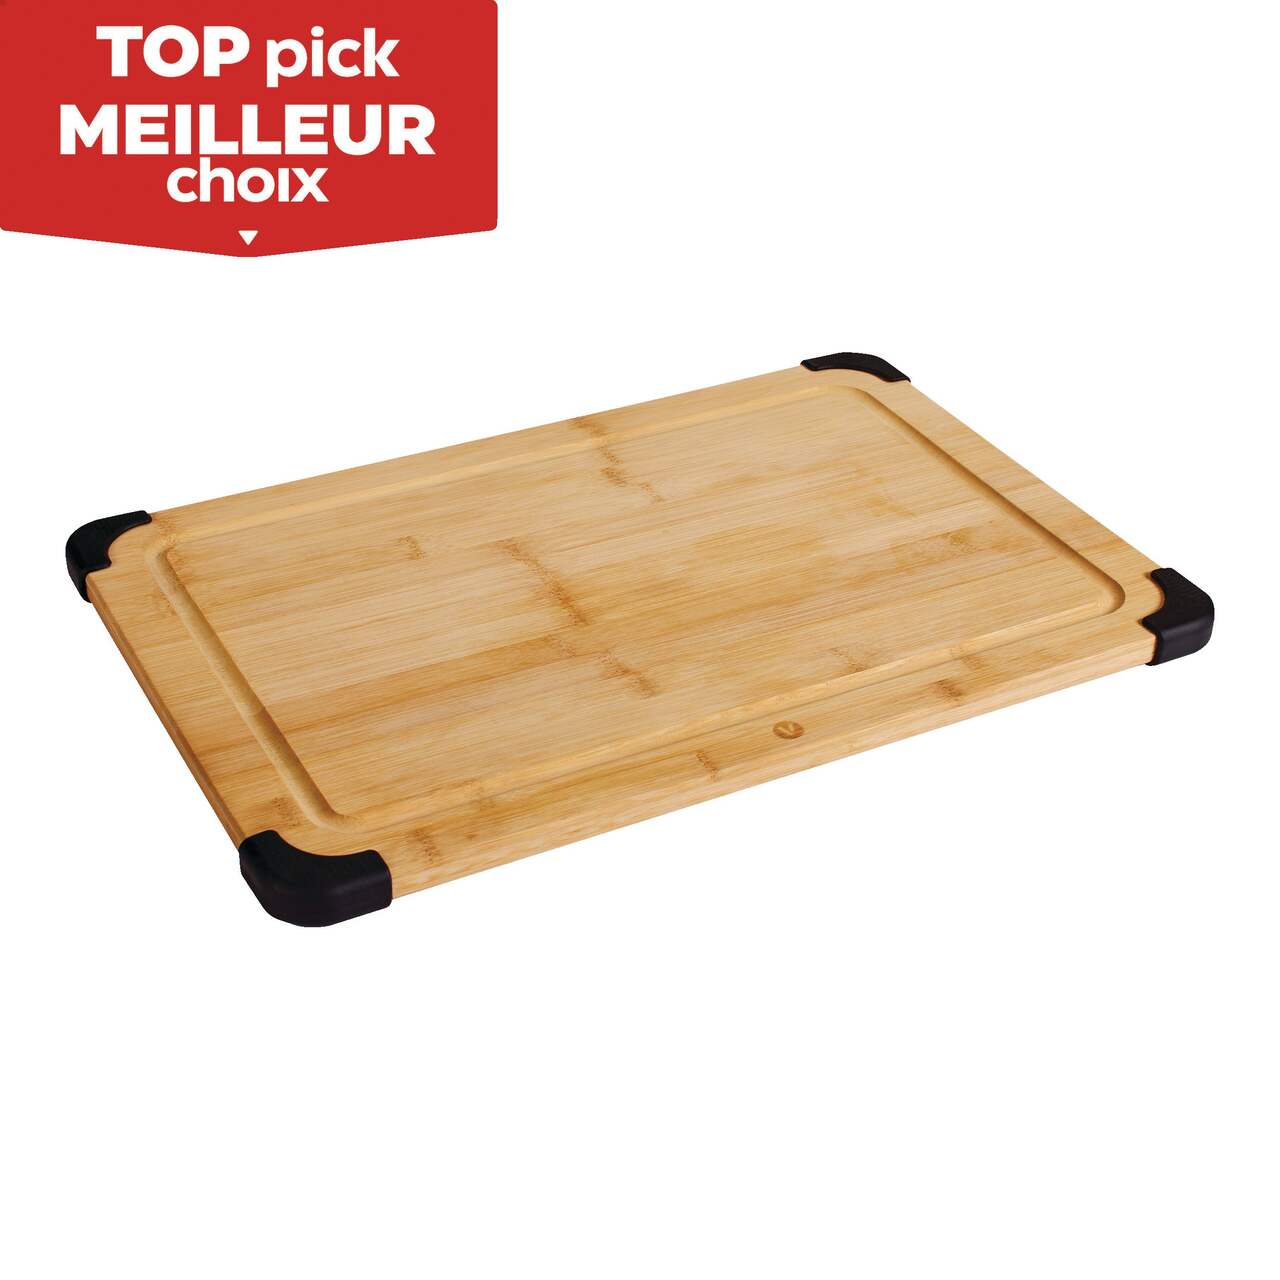 https://media-www.canadiantire.ca/product/living/kitchen/cutlery/1428365/vida-by-paderno-12x18-bamboo-cutting-board-e68fe5da-f25c-48c5-8d03-aa60f3c5dec8-jpgrendition.jpg?imdensity=1&imwidth=640&impolicy=mZoom